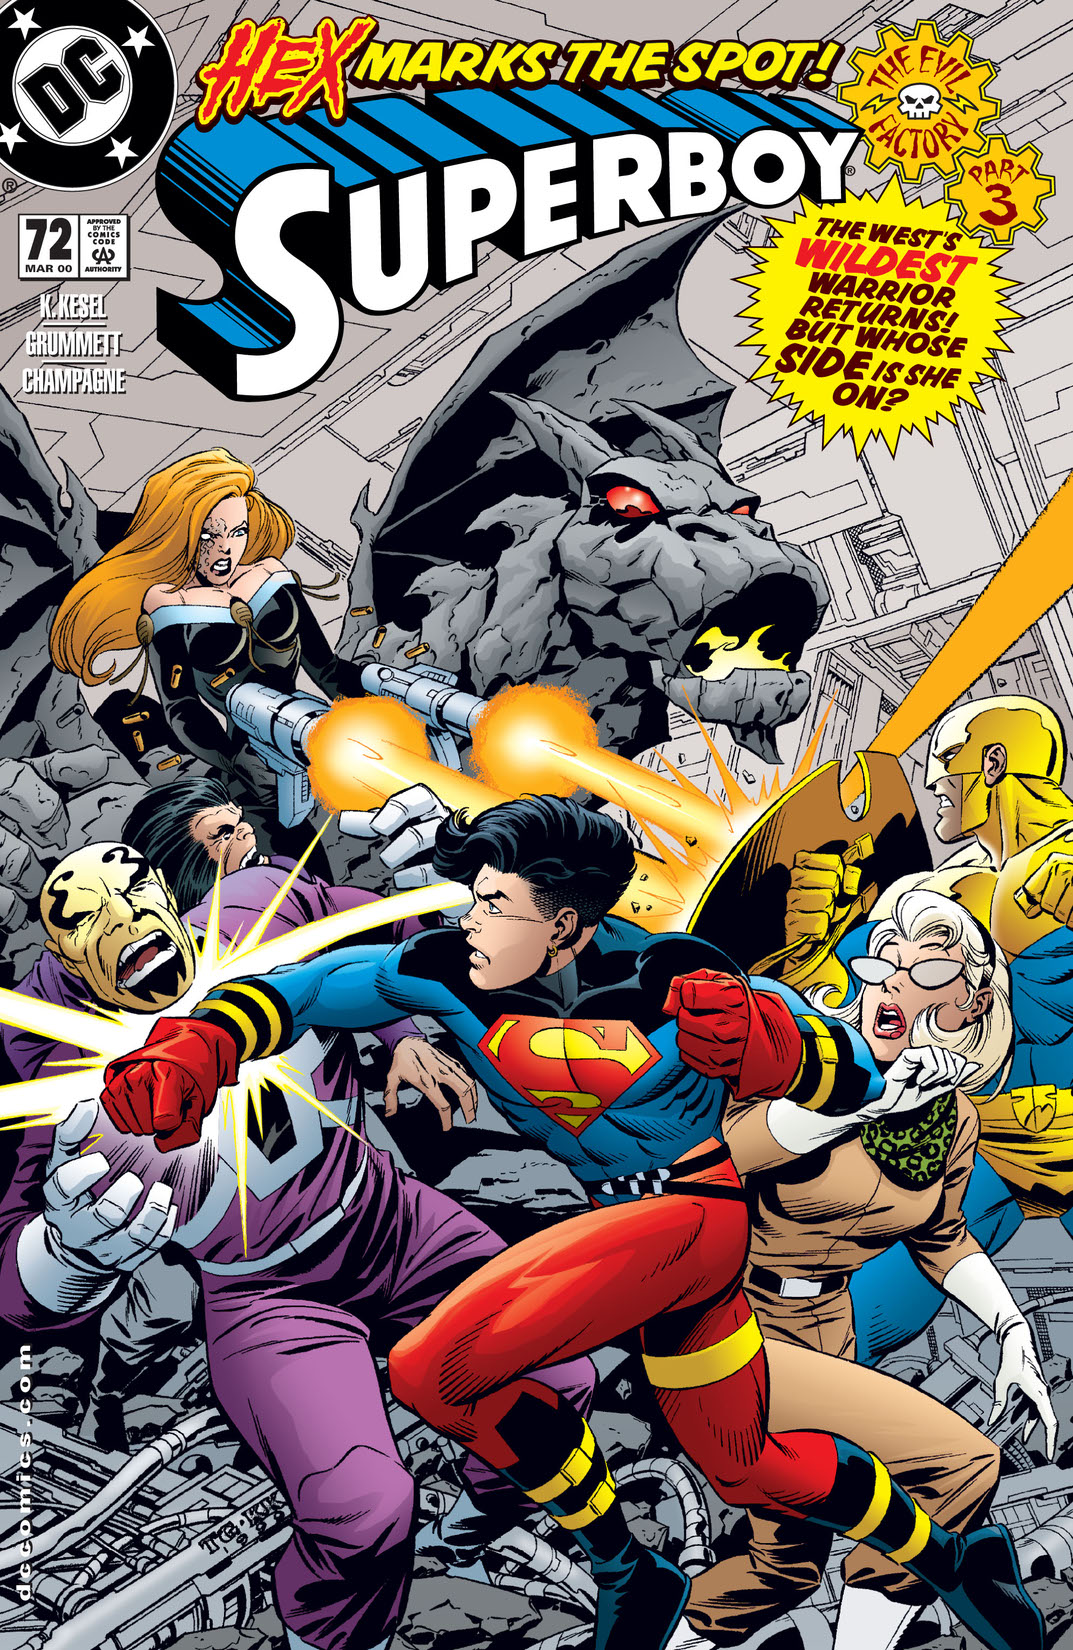 Superboy (1993-) #72 preview images